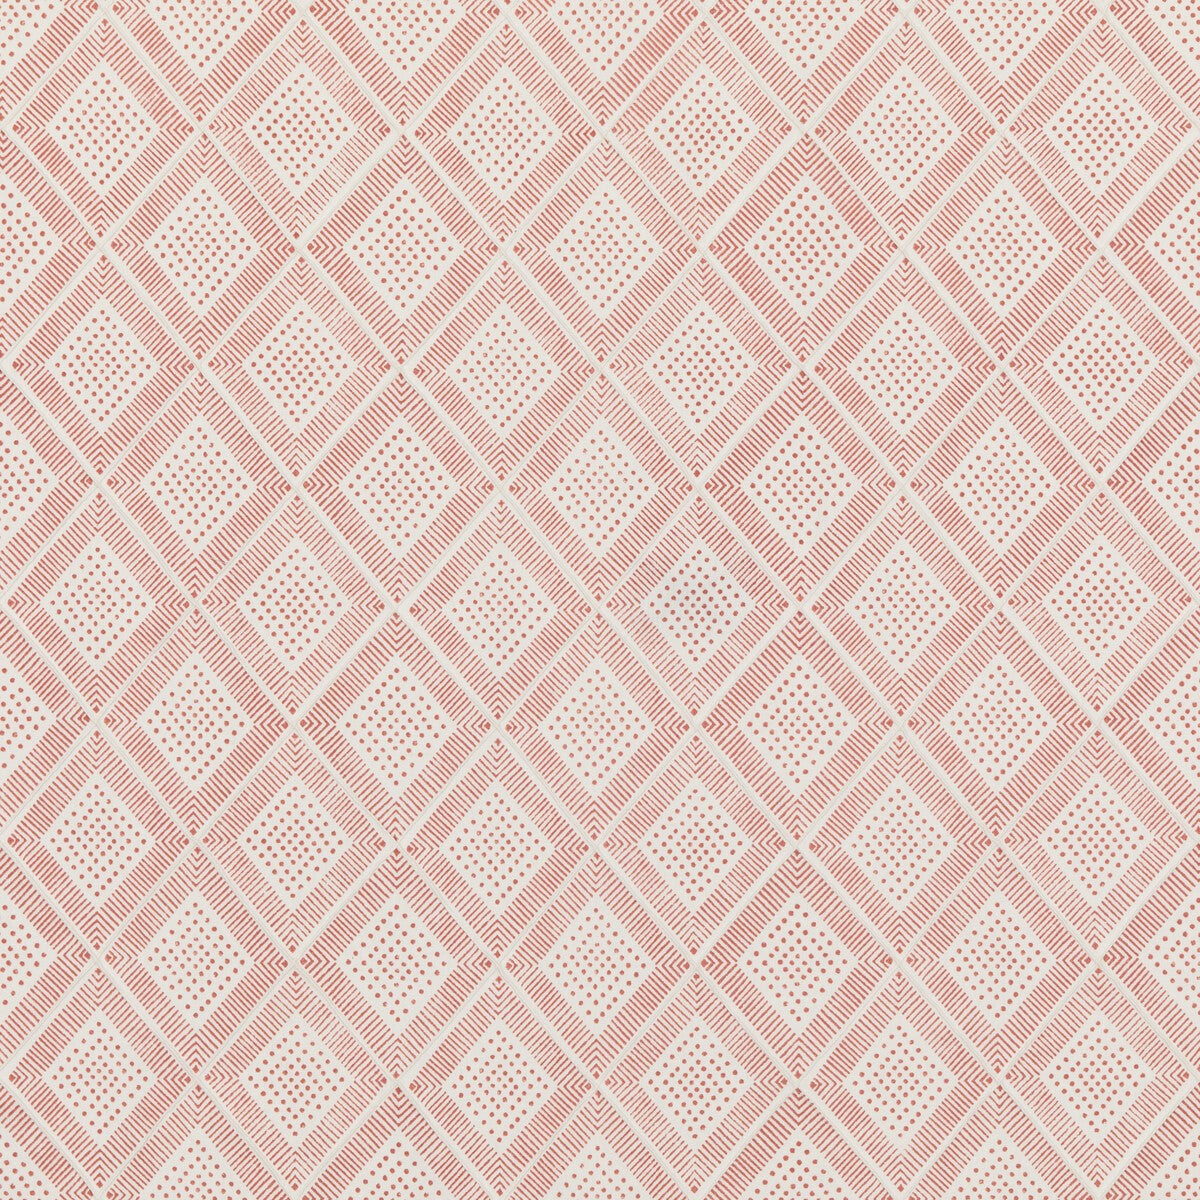 Block Trellis fabric in fuchsia color - pattern PP50484.6.0 - by Baker Lifestyle in the Block Party collection